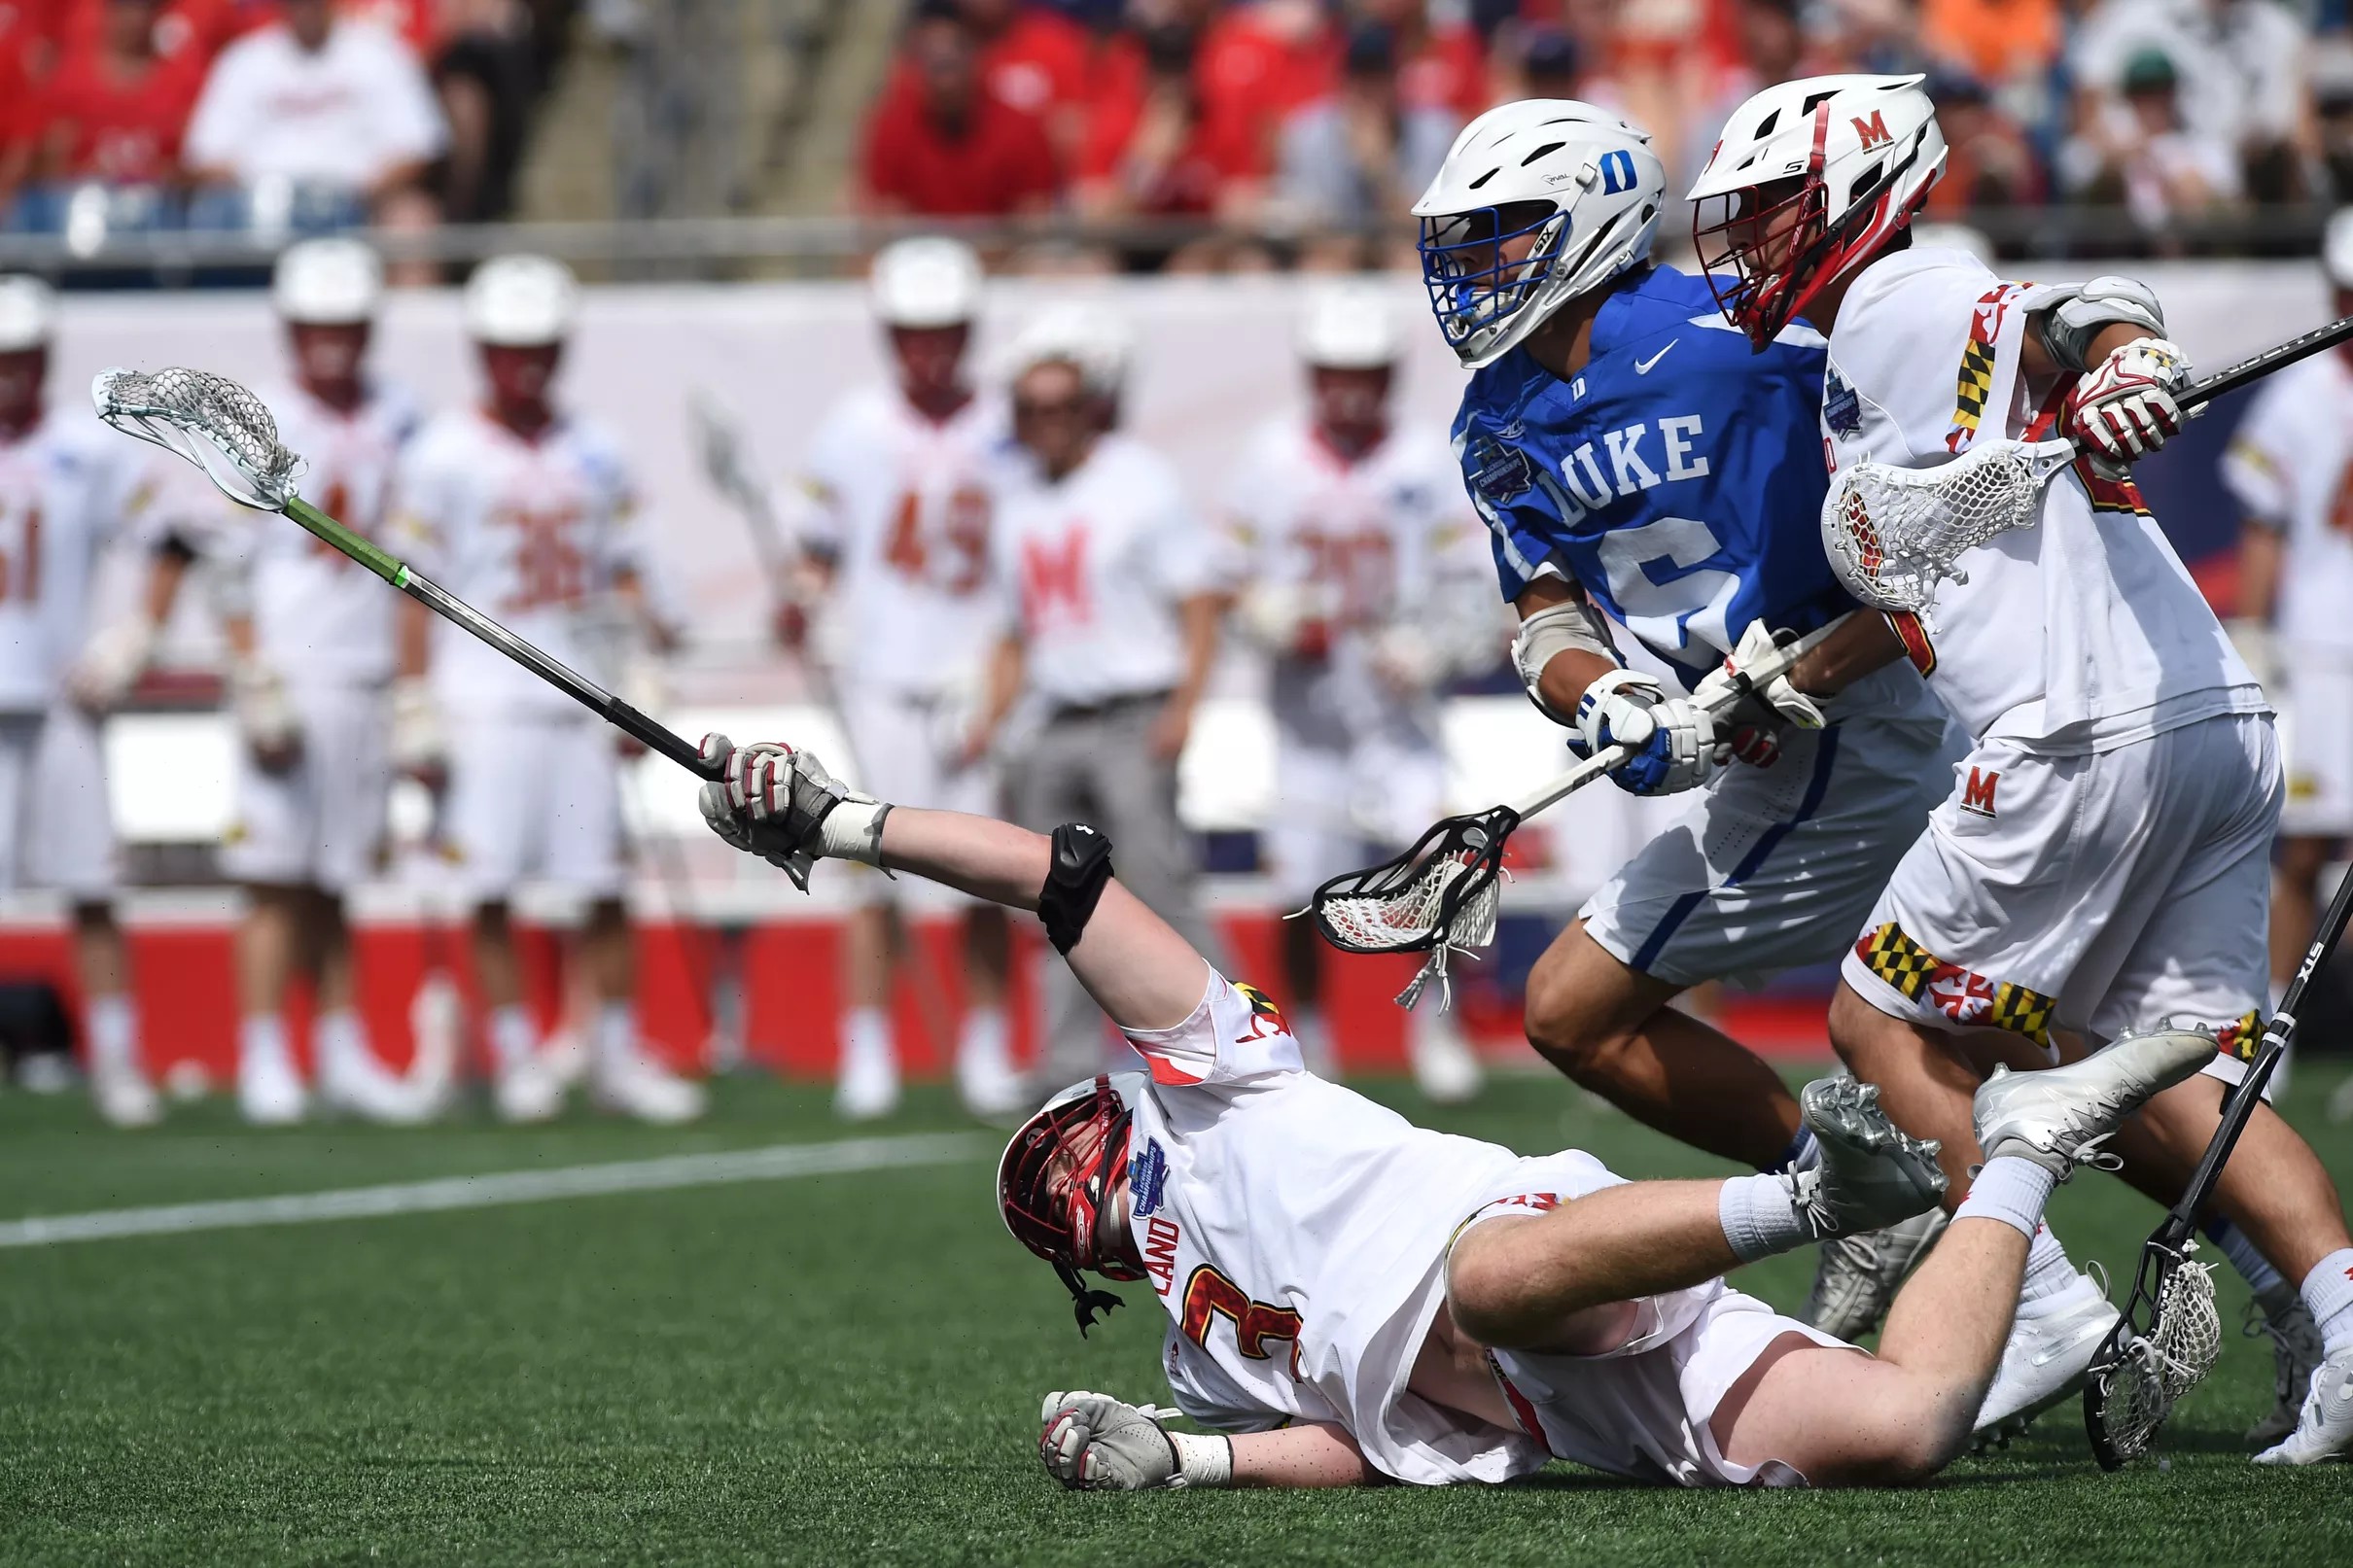 Maryland men’s lacrosse was doomed by its slow start and finish against